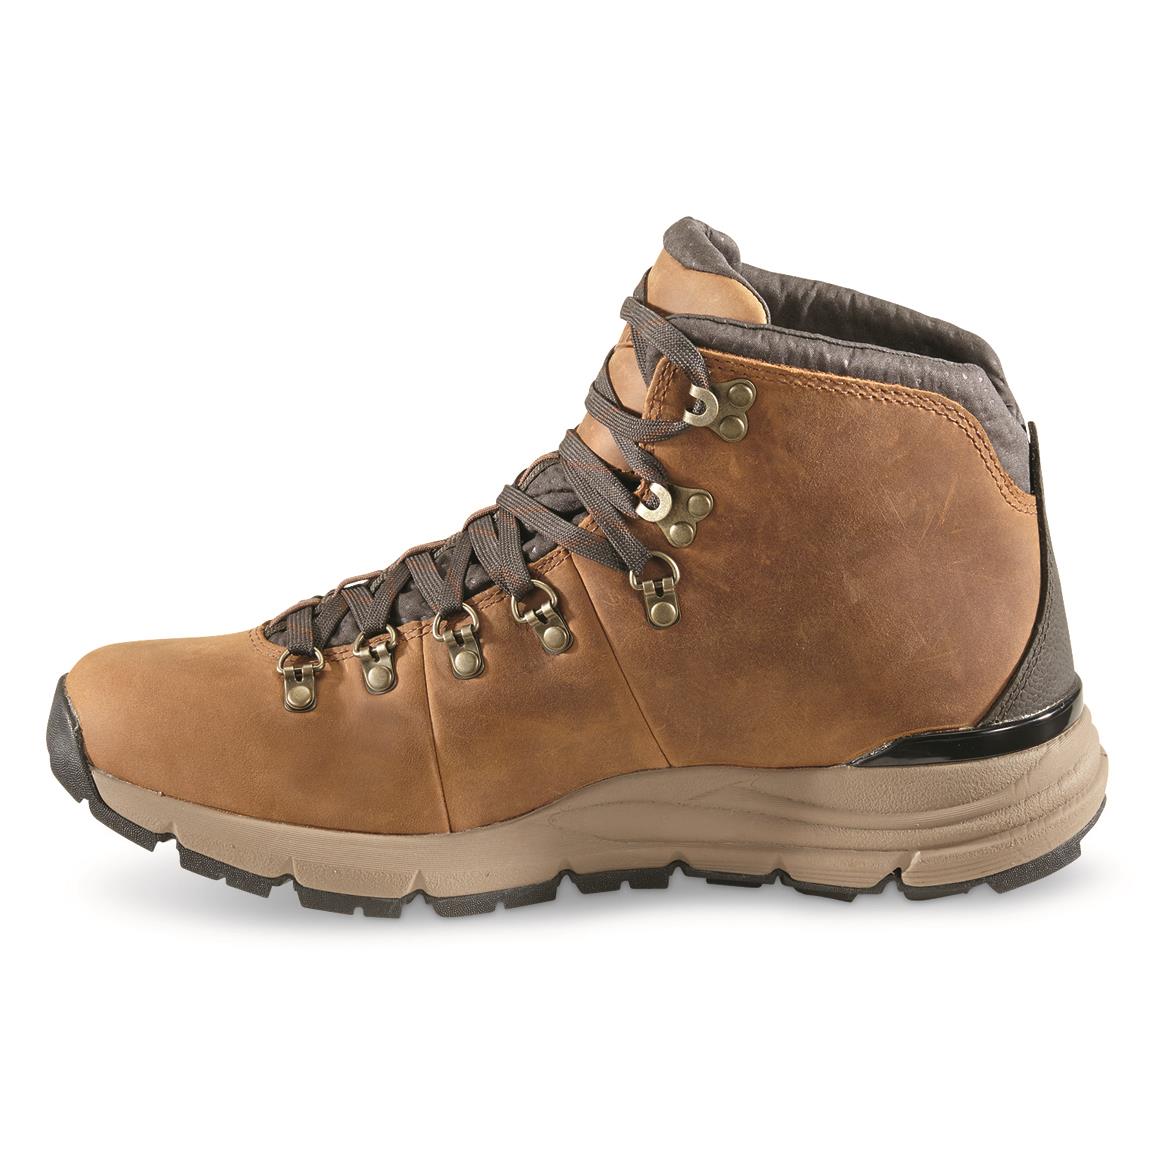 DANNER Hunting Boots | Men's Boots & Shoes | Boots & Shoes | Sportsman ...